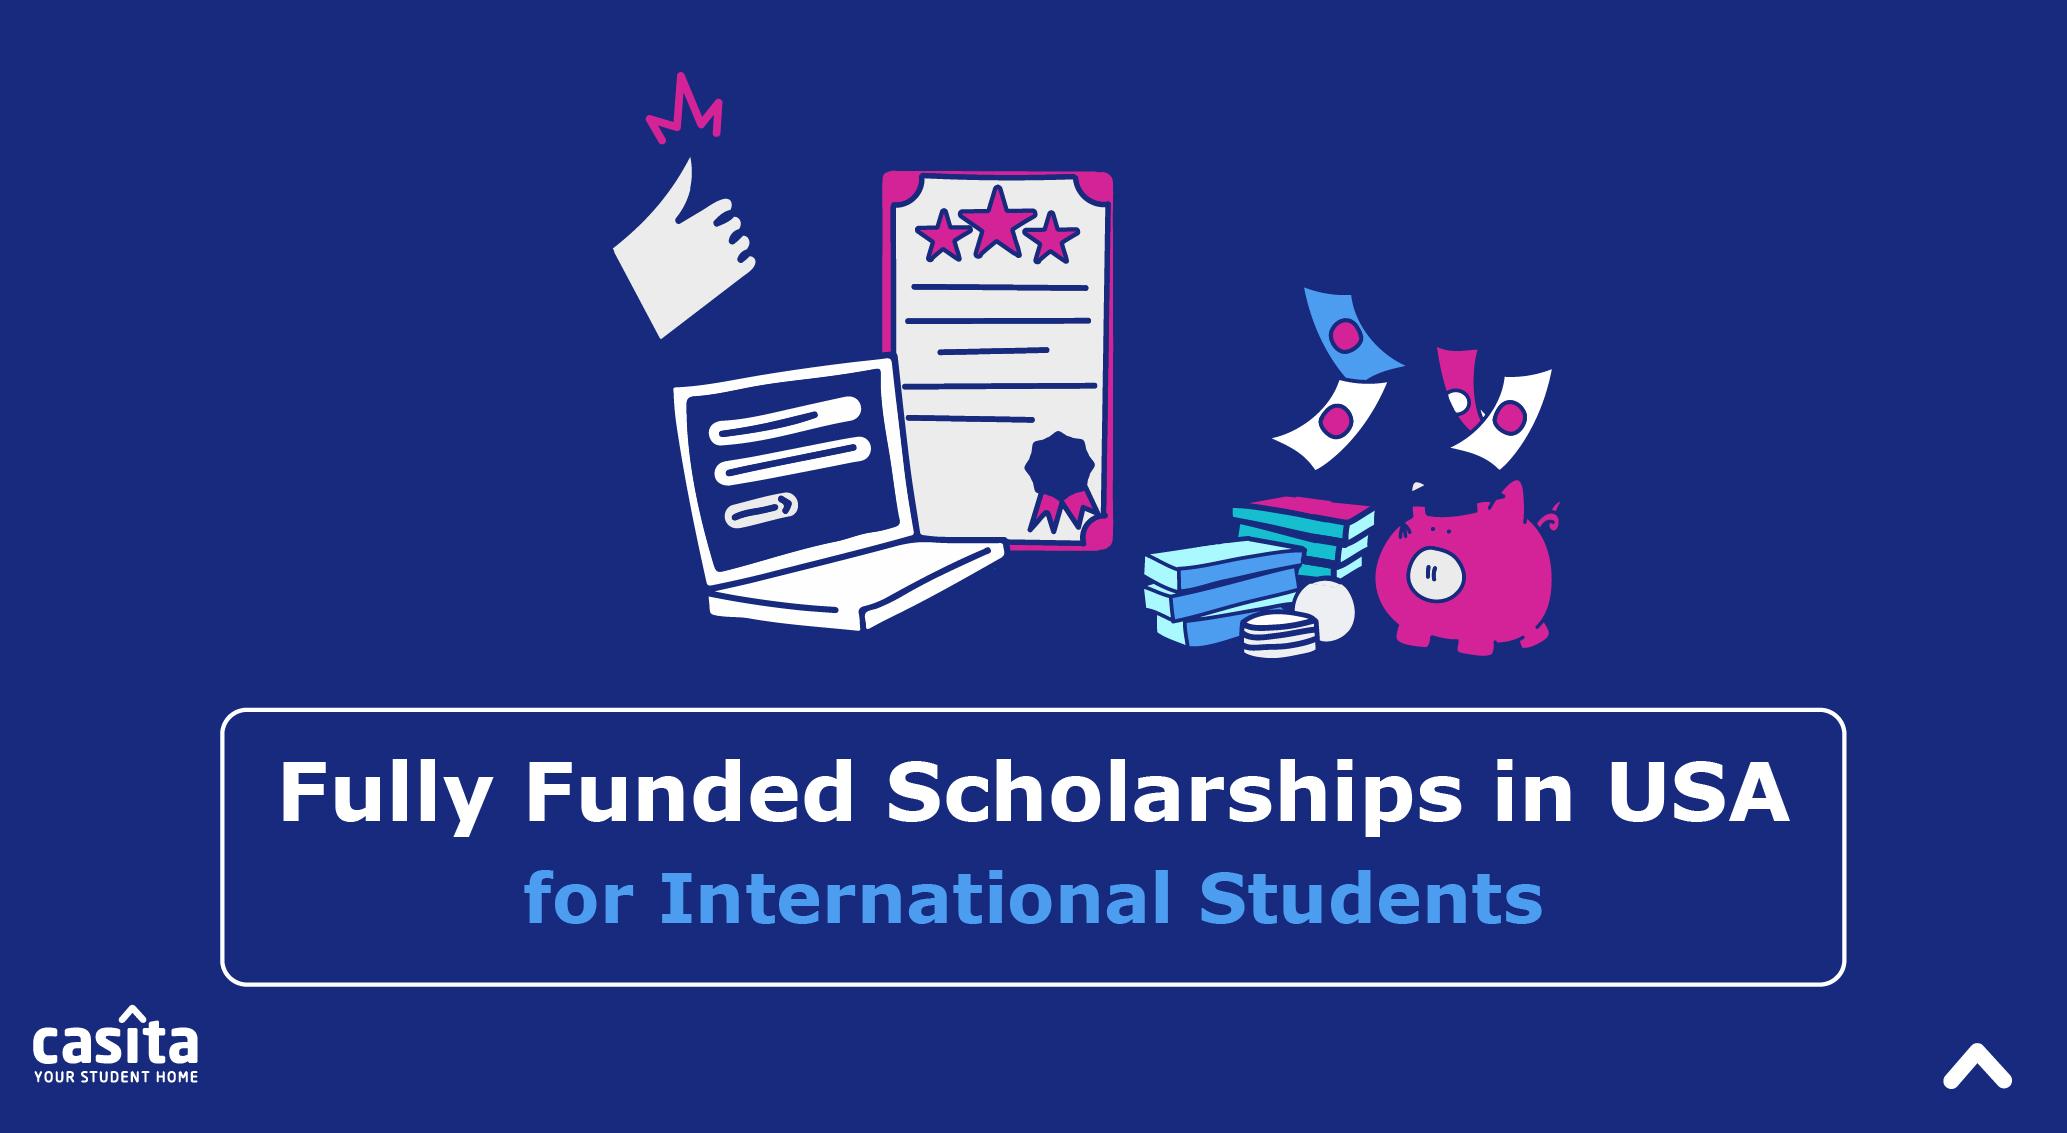 Fully Funded Scholarships in USA for International Students | Casita.com